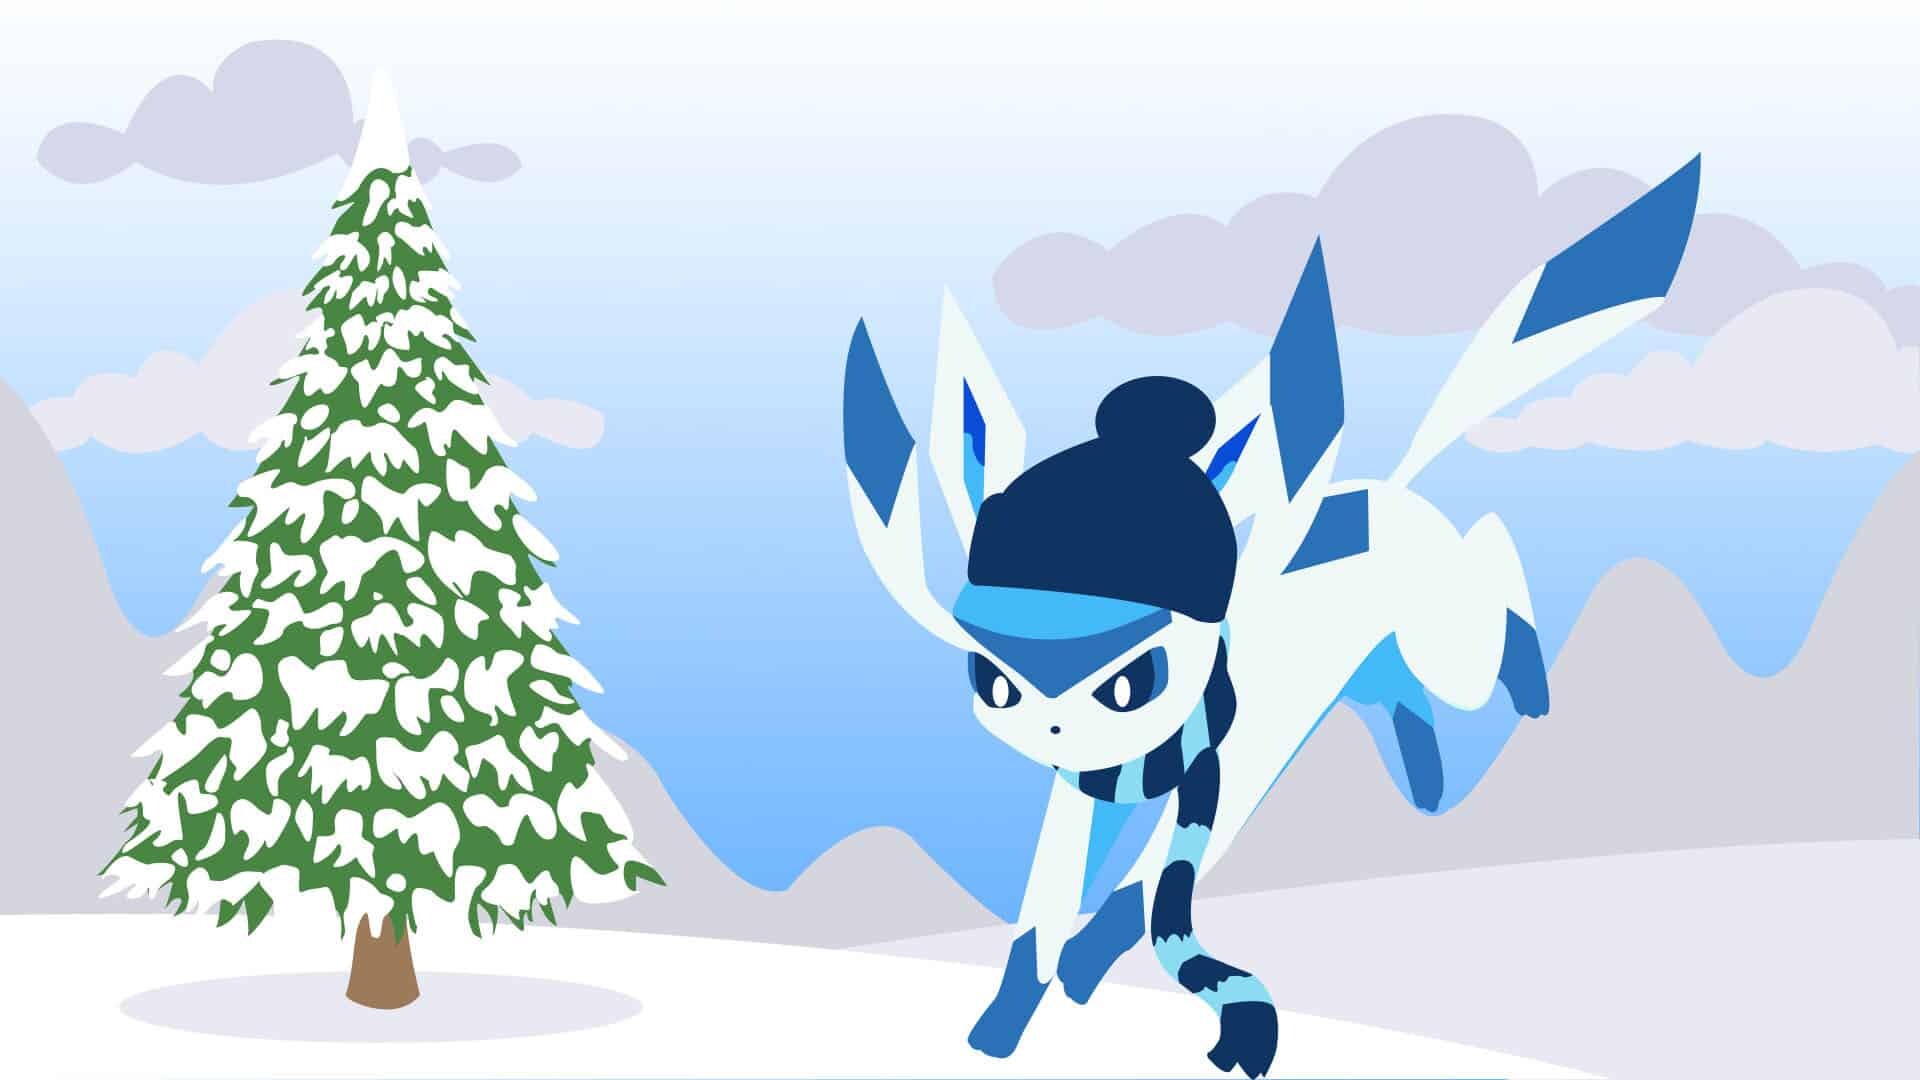 Glaceon: Winter, A Pokemon with long, pointed ears, dark eyes, and a small nose, A quadruped mammalian creature. 1920x1080 Full HD Wallpaper.